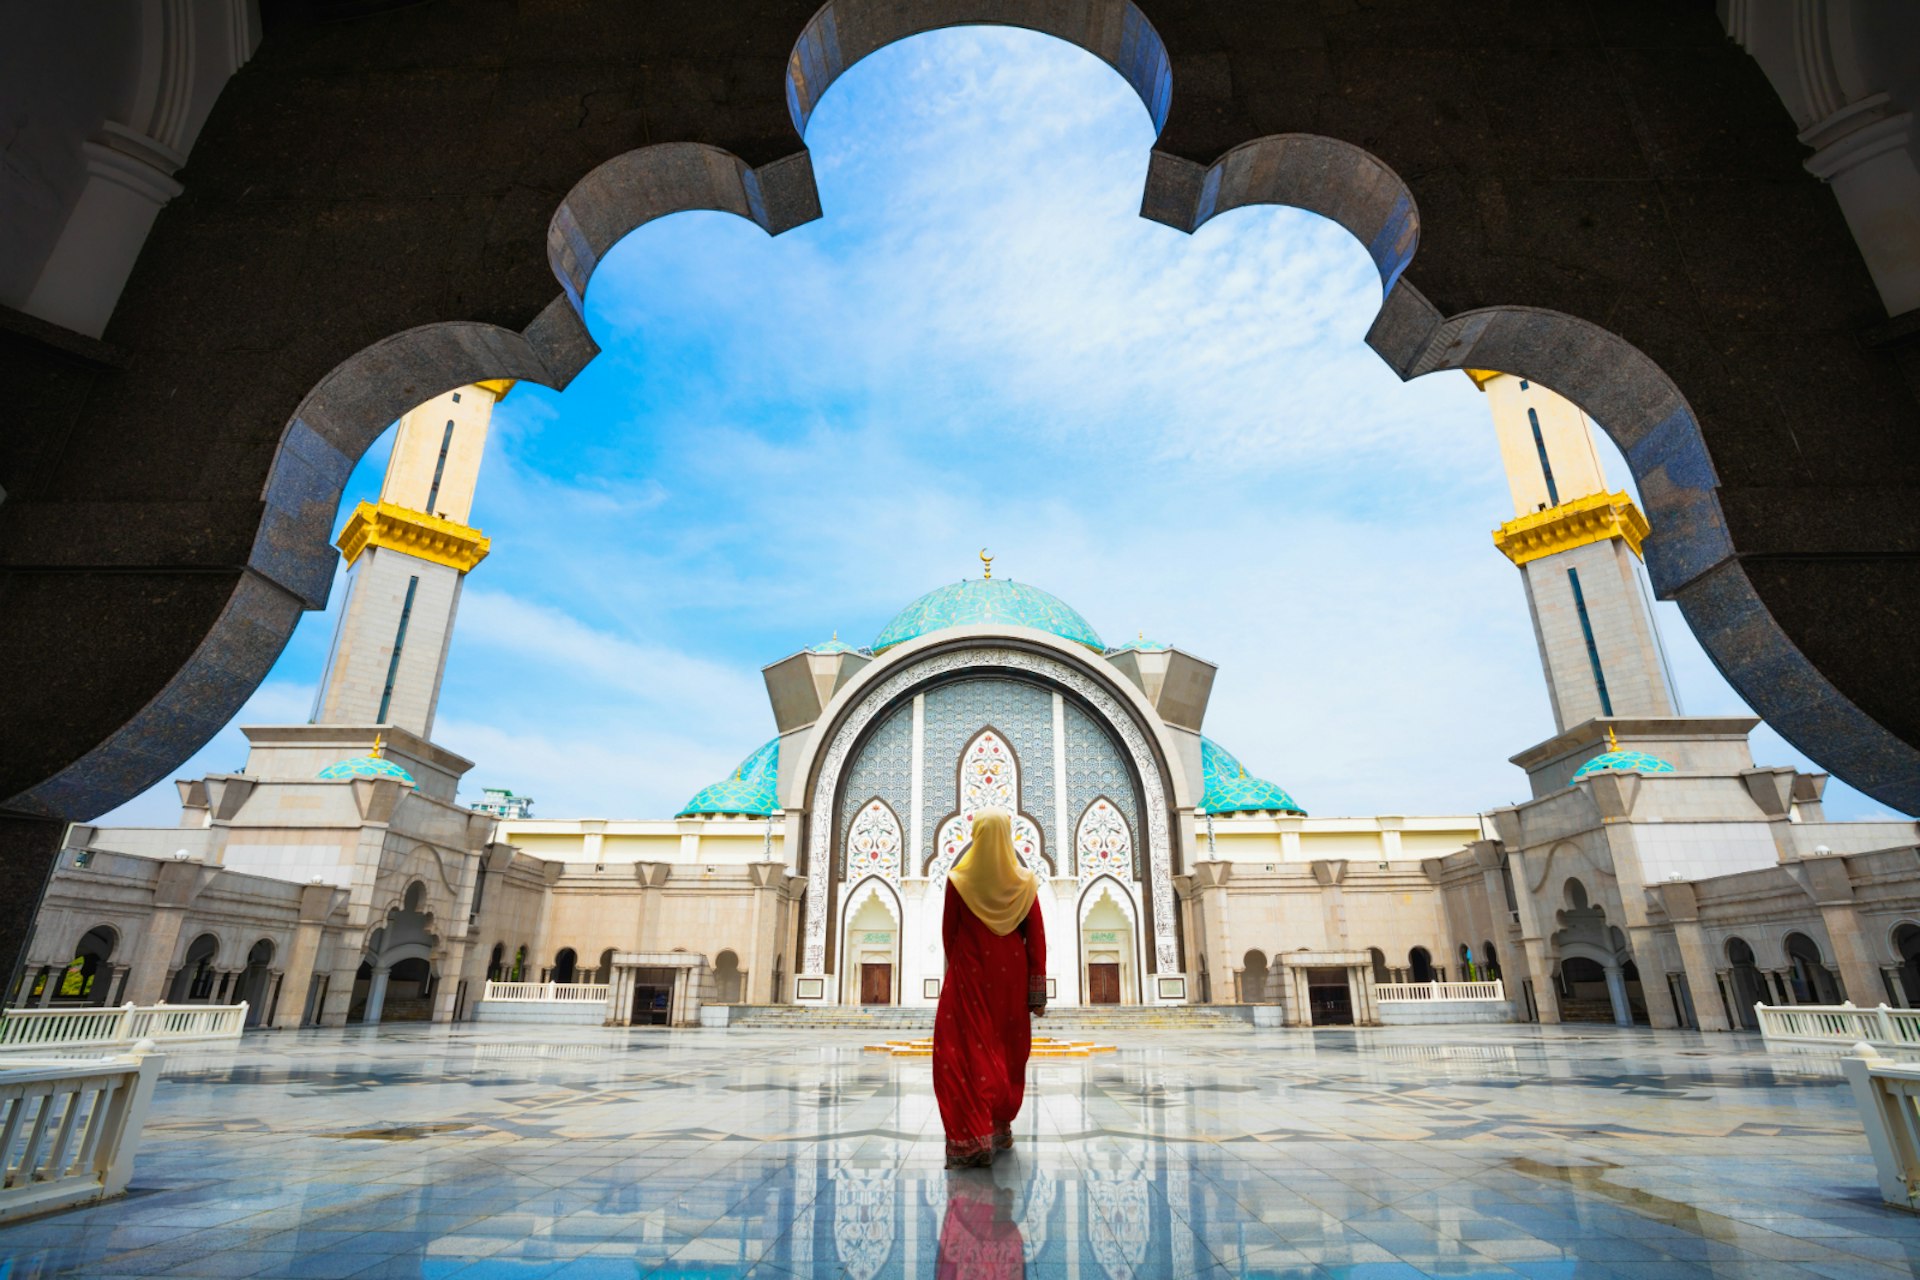 A woman walks into a mosque in Malaysia © Patrick Foto / Getty Images